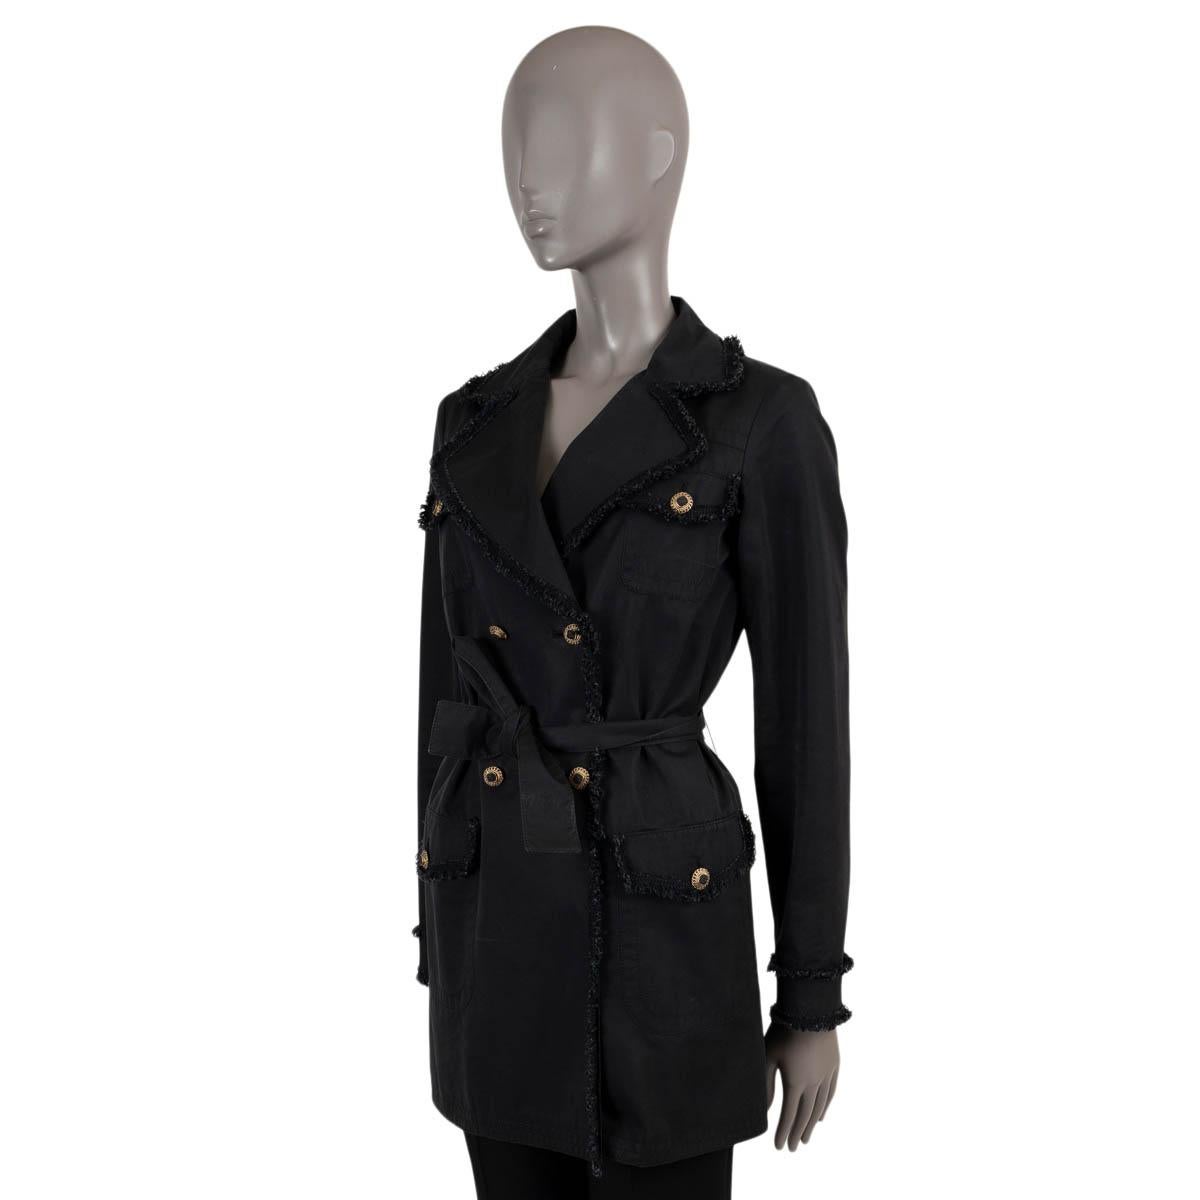 100% authentic Chanel trench coat in black cotton (70%) and silk (30%). Features frayed tweed trims, peak lapels and four buttoned flap pockets. Closes with a double row of buttons and matching self-tie belt and is unlined. Has been worn and is in